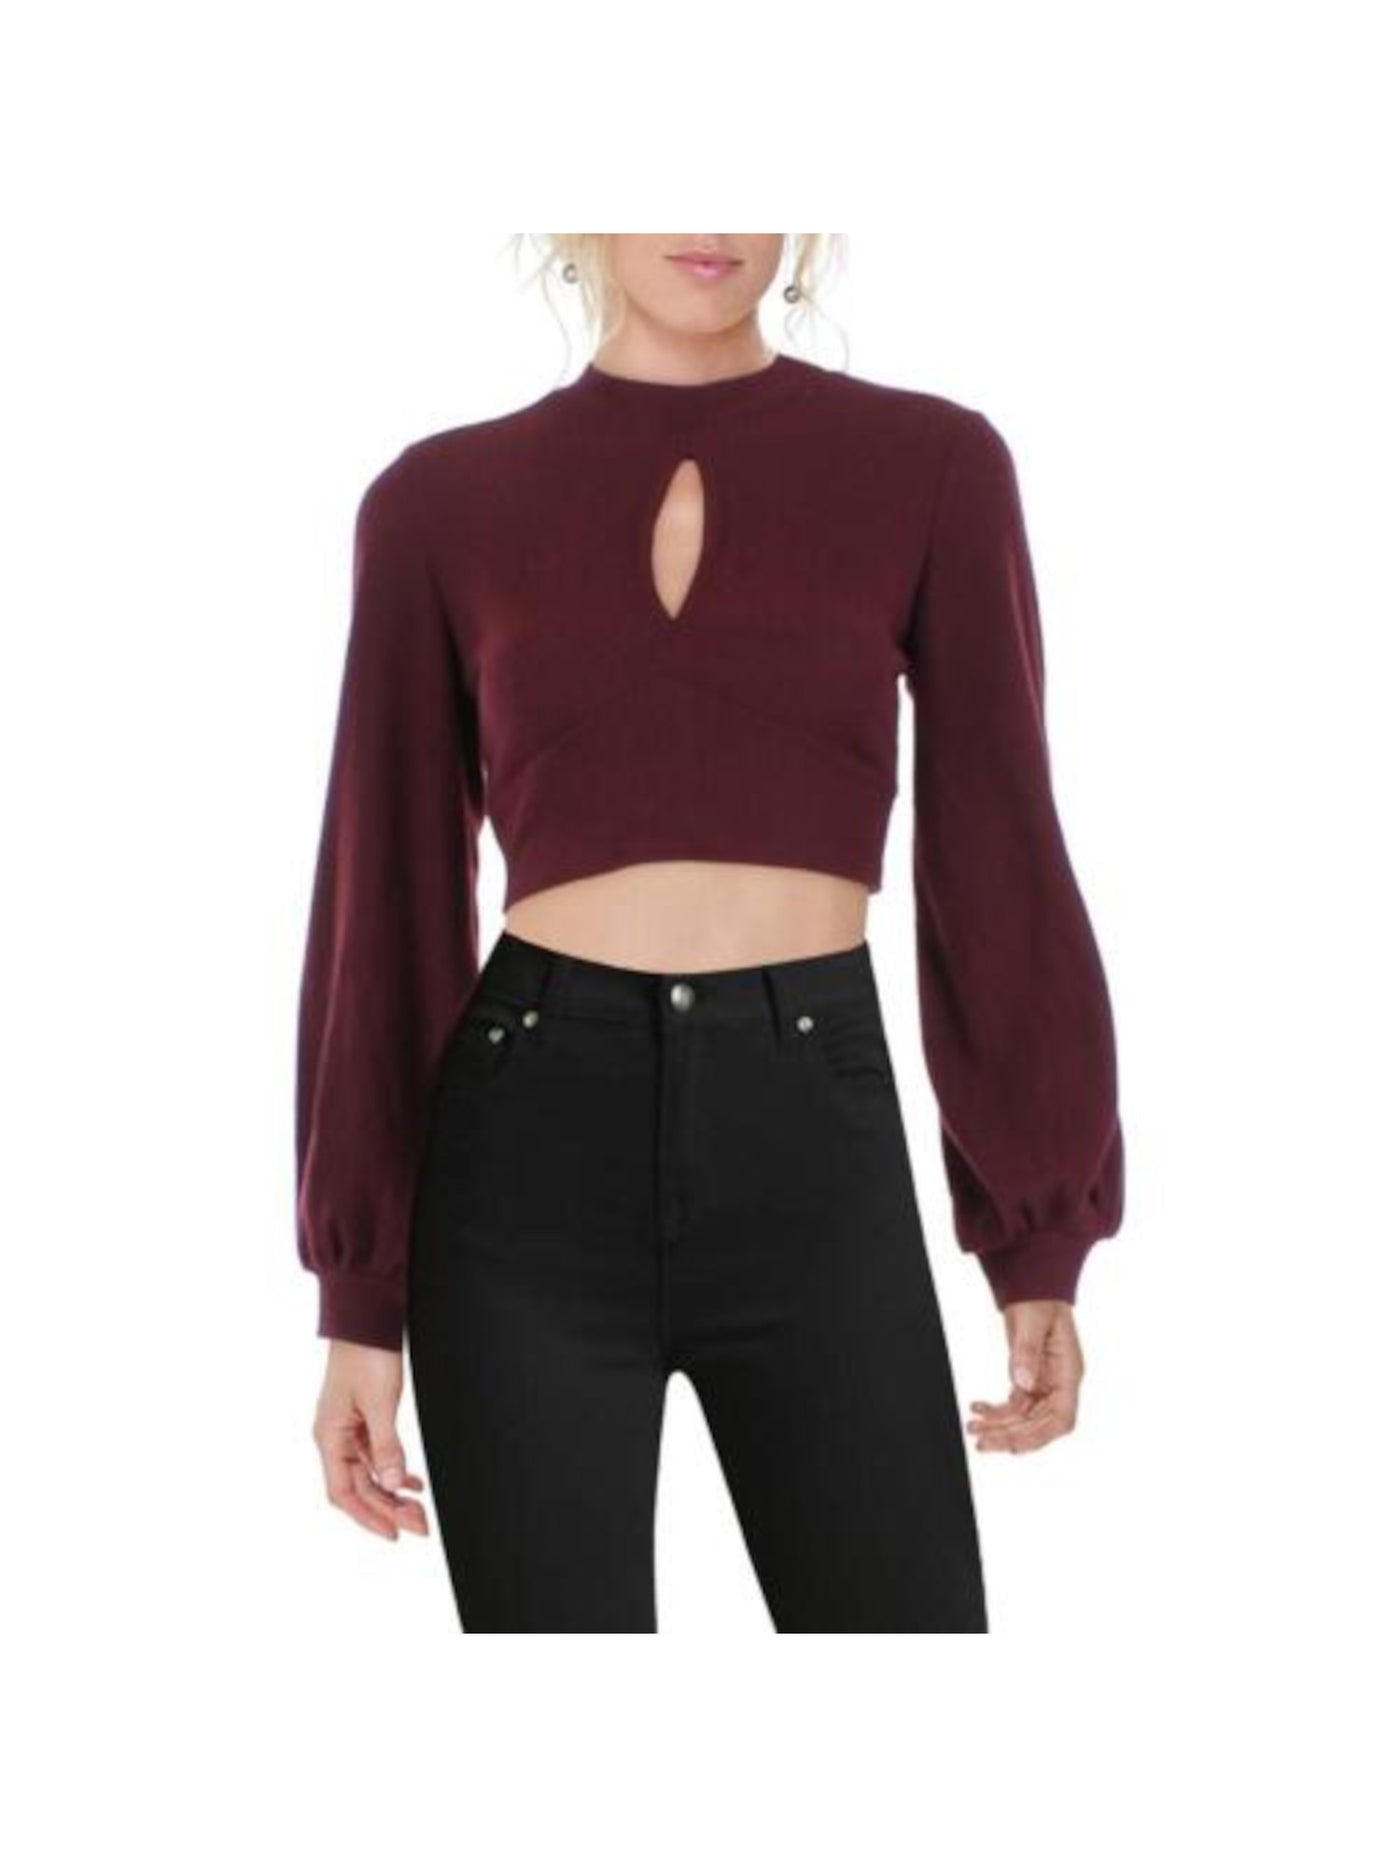 ALMOST FAMOUS Womens Burgundy Cut Out Ribbed Button Neck Open Tie Back Balloon Sleeve Mock Neck Crop Top Sweater Juniors M